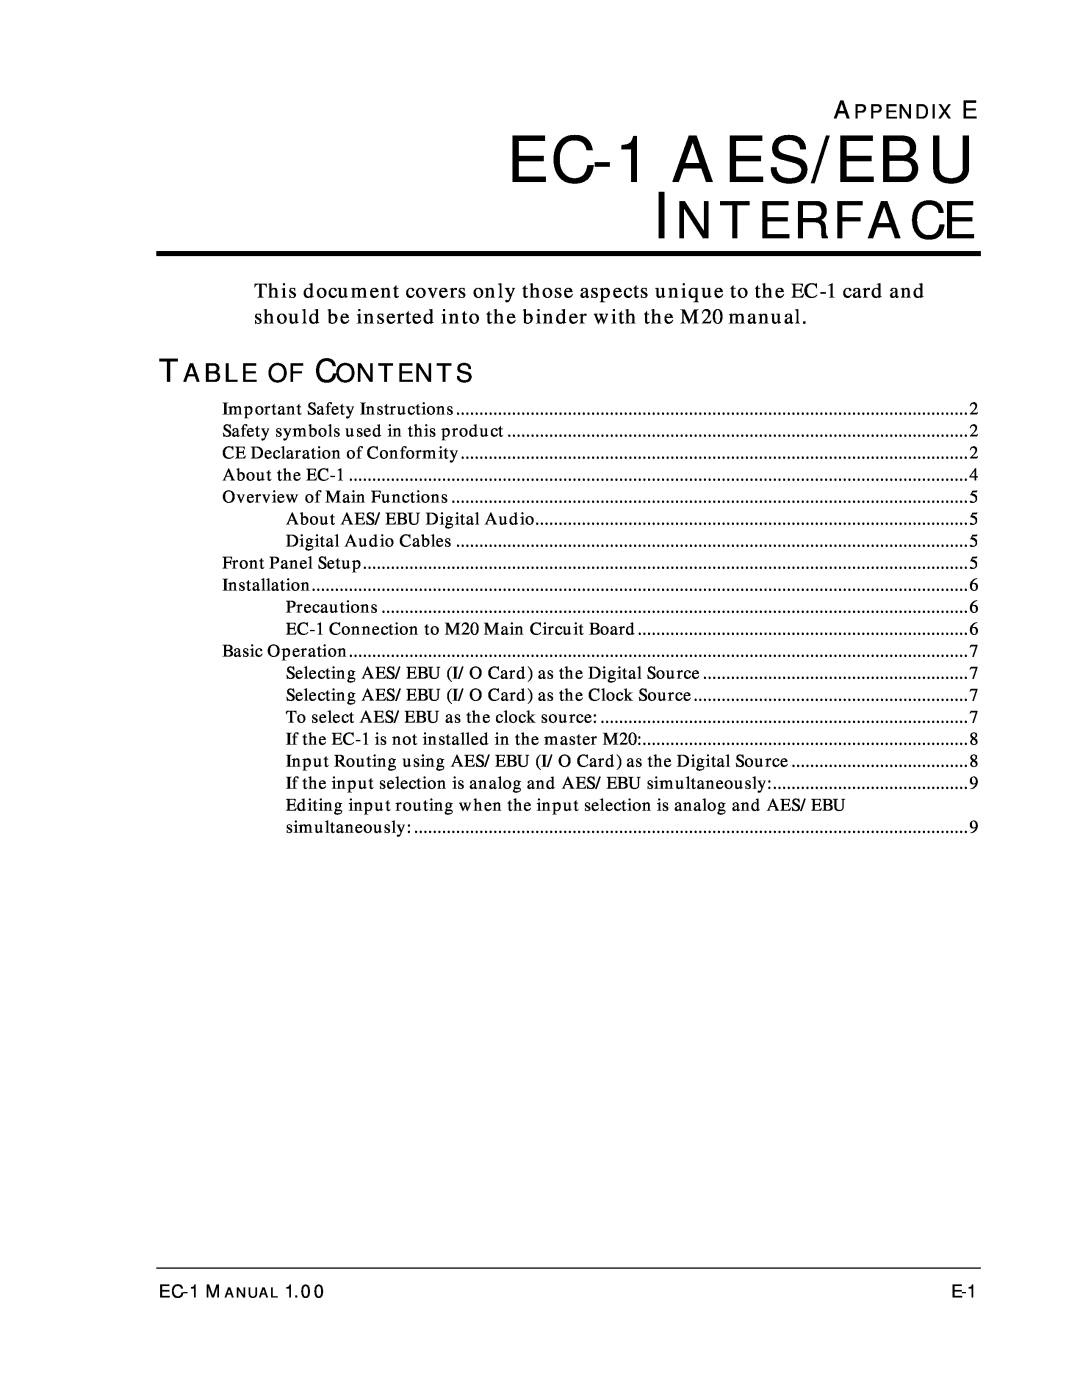 Alesis EC-1 A ES/EBU Interface, Table Of Contents, This document covers only those aspects unique to the EC-1 card and 